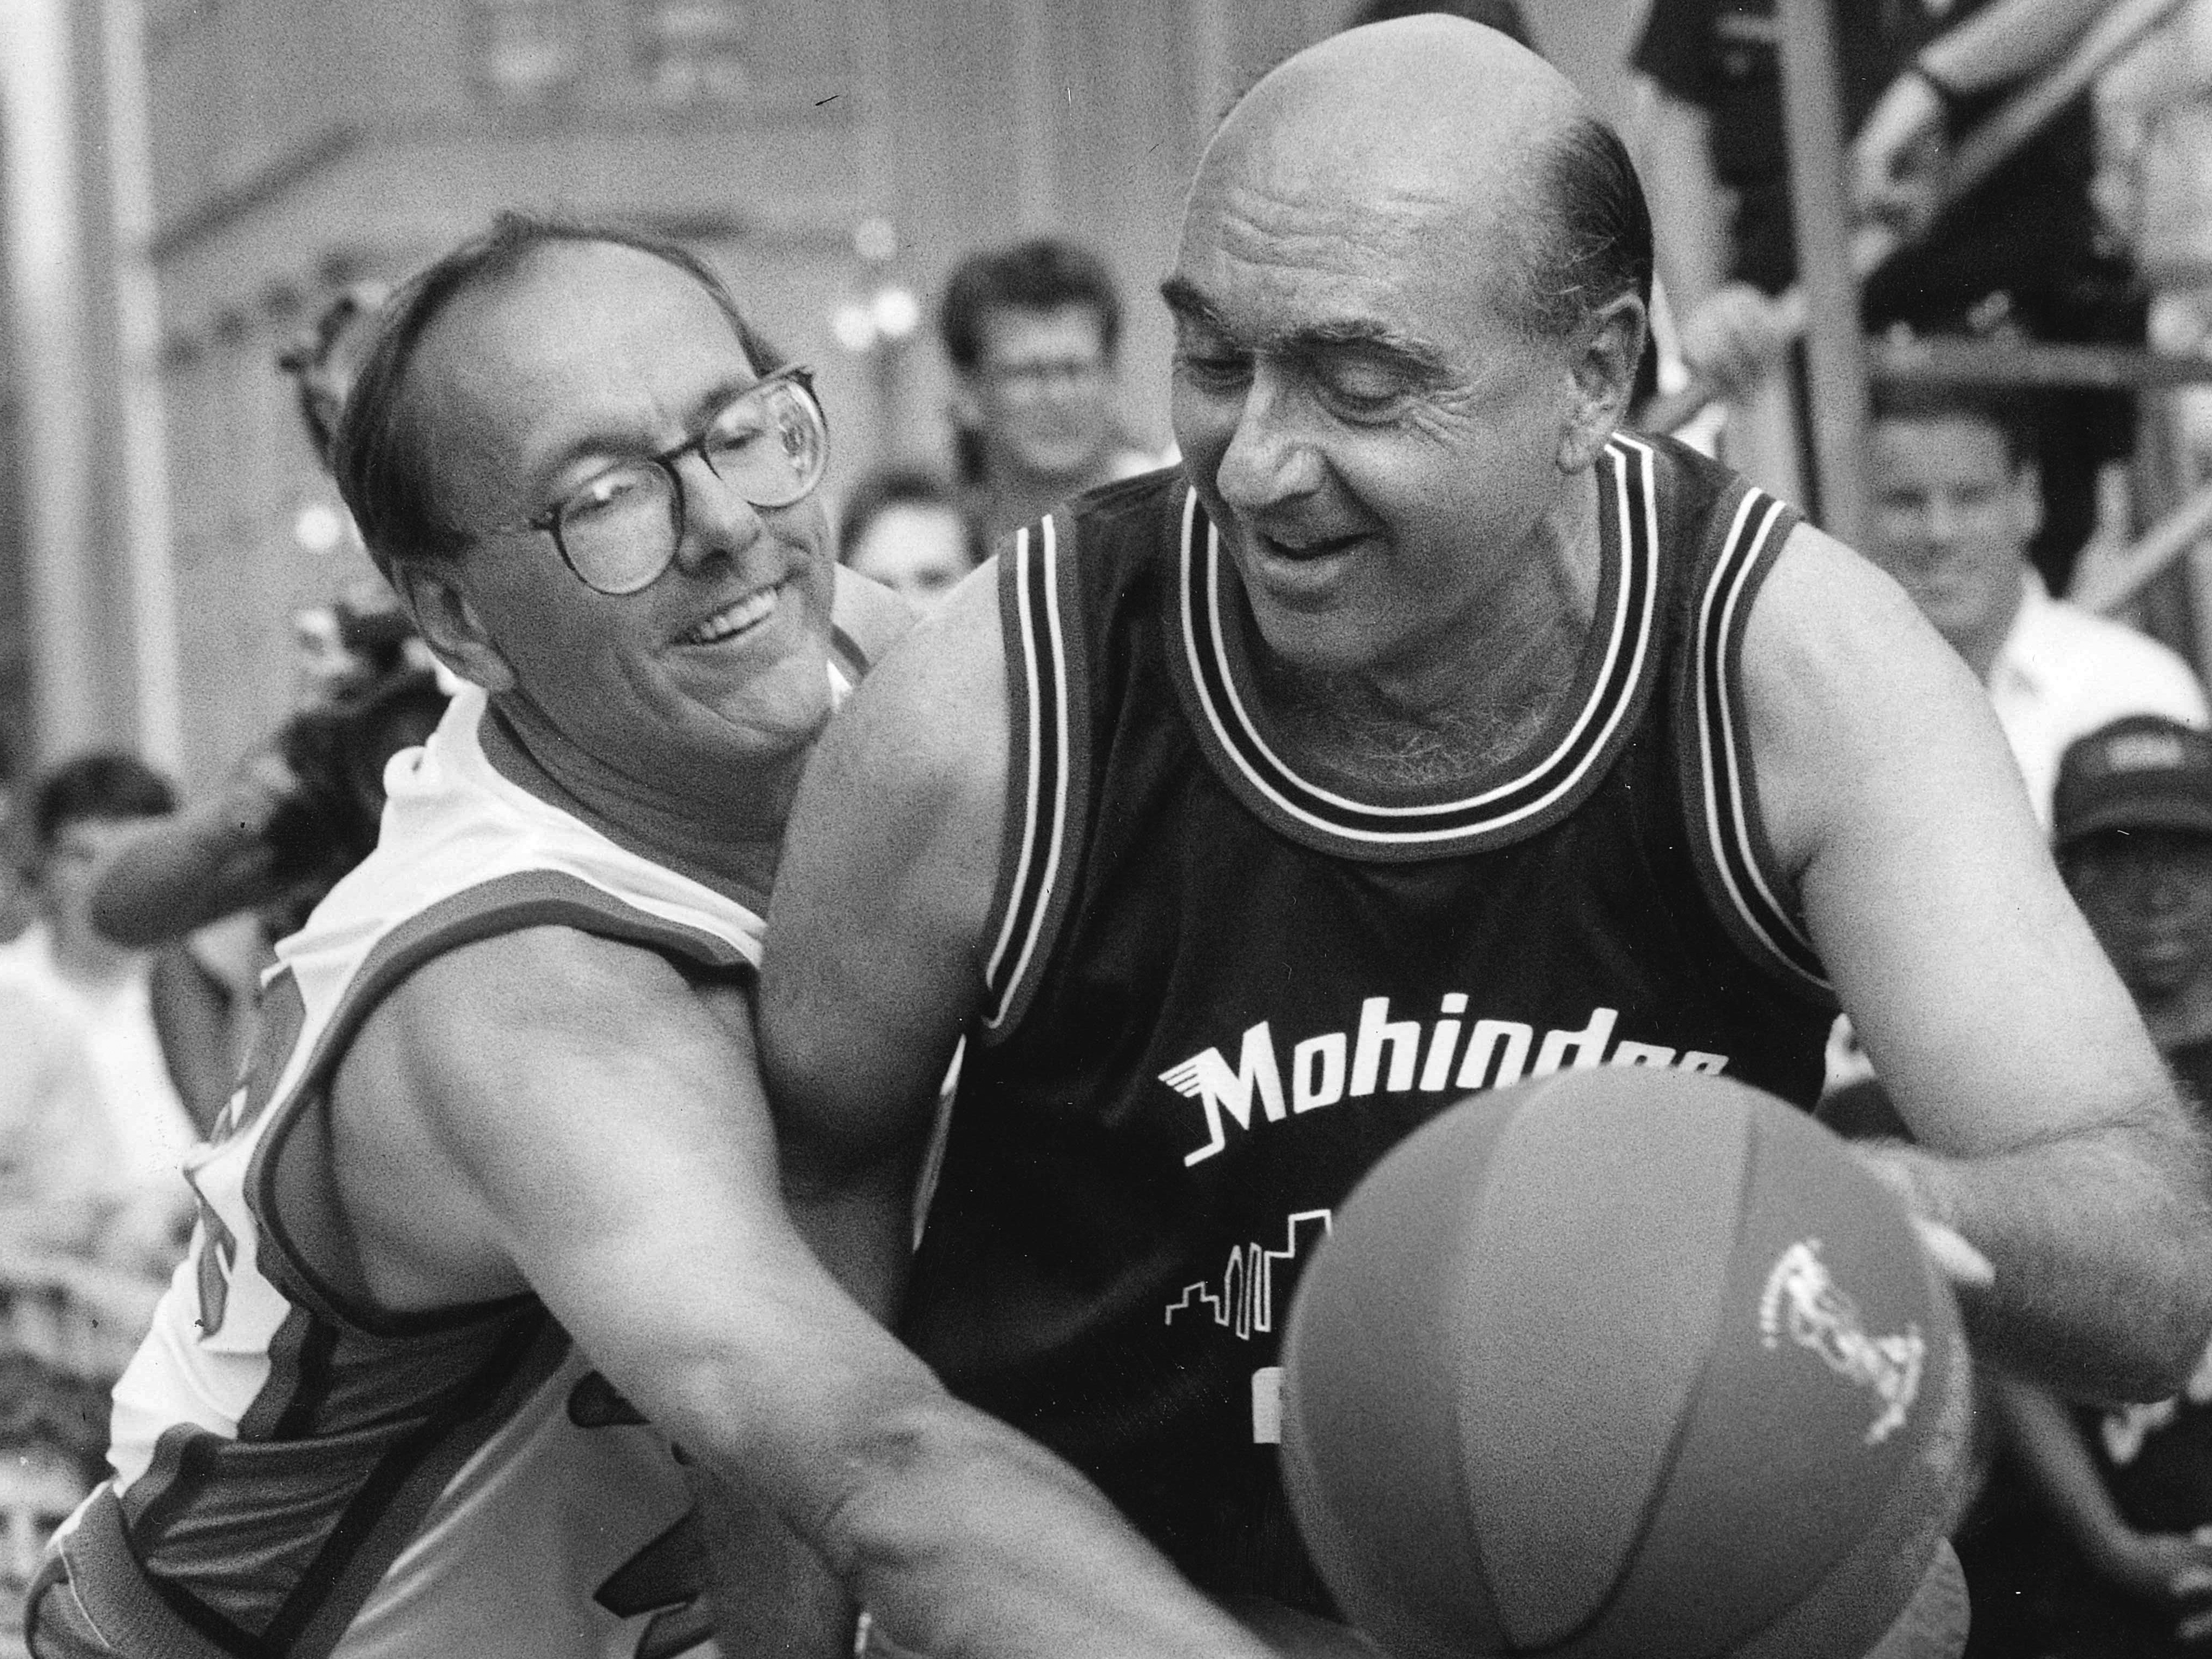 Jim Boeheim wins over Dick Vitale in one-on-one basketball game (from the archives)